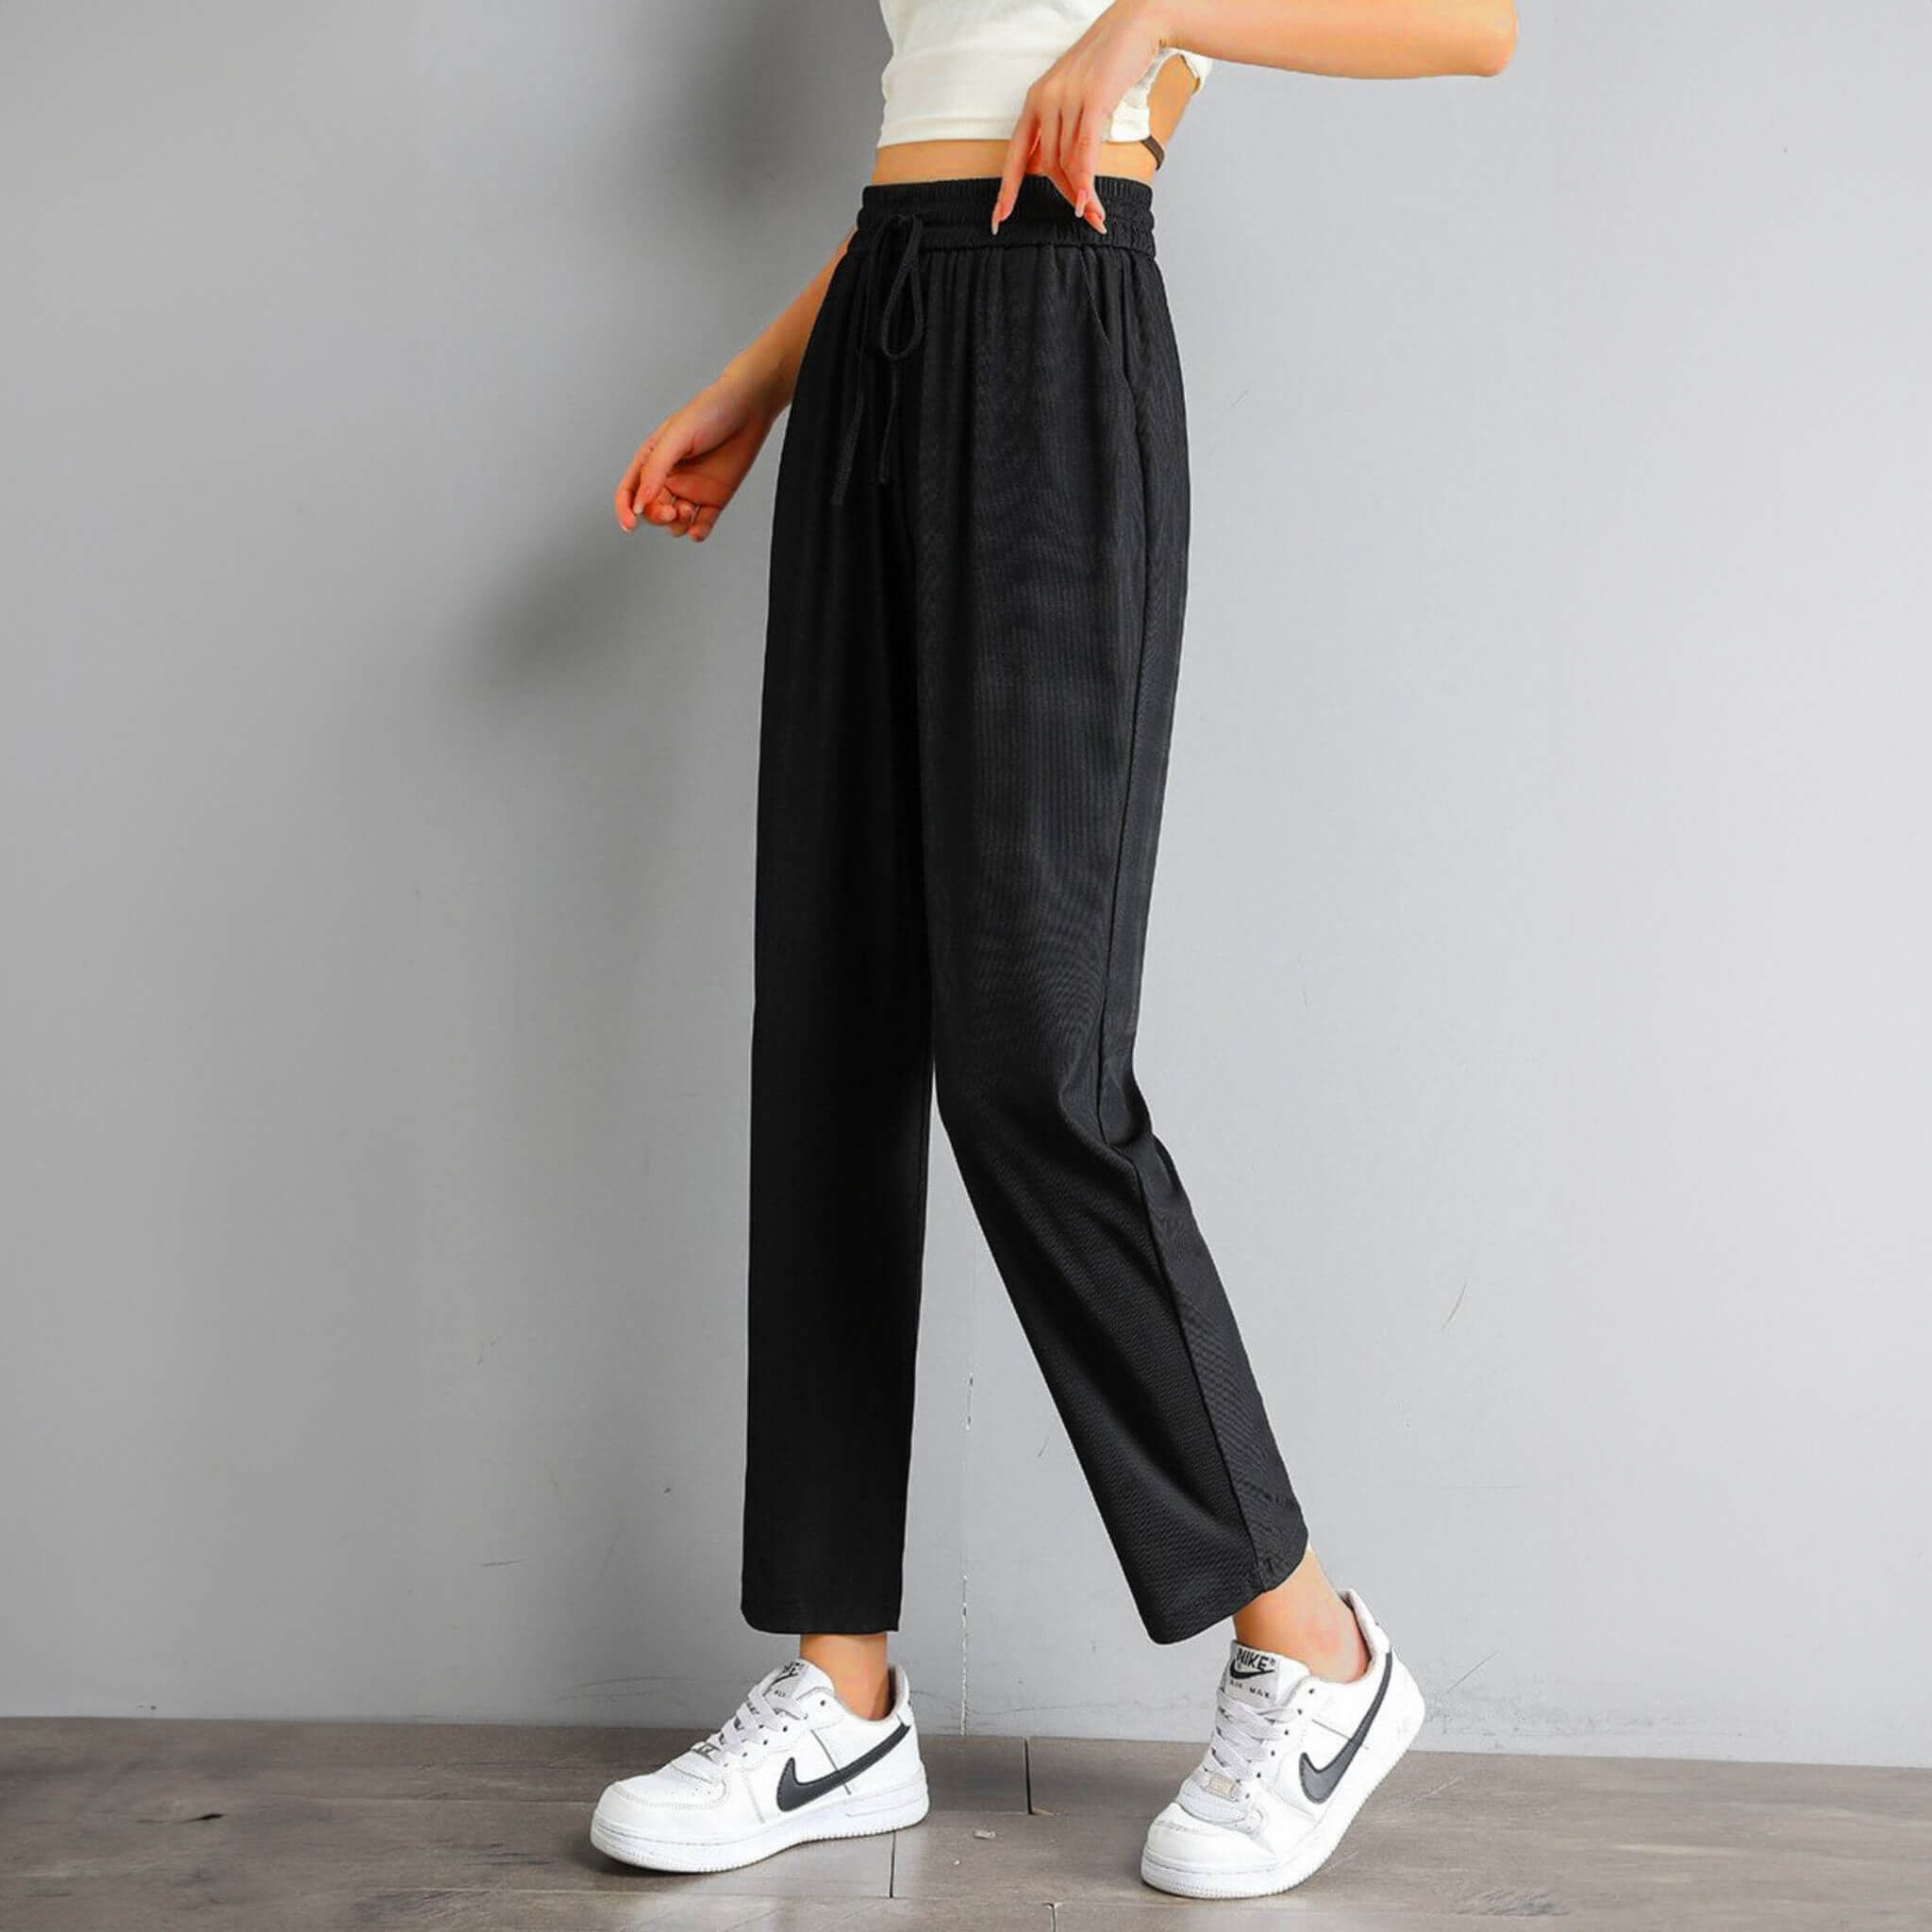 Women's High-waisted Relaxed fit Trousers  UponBasics Black S 